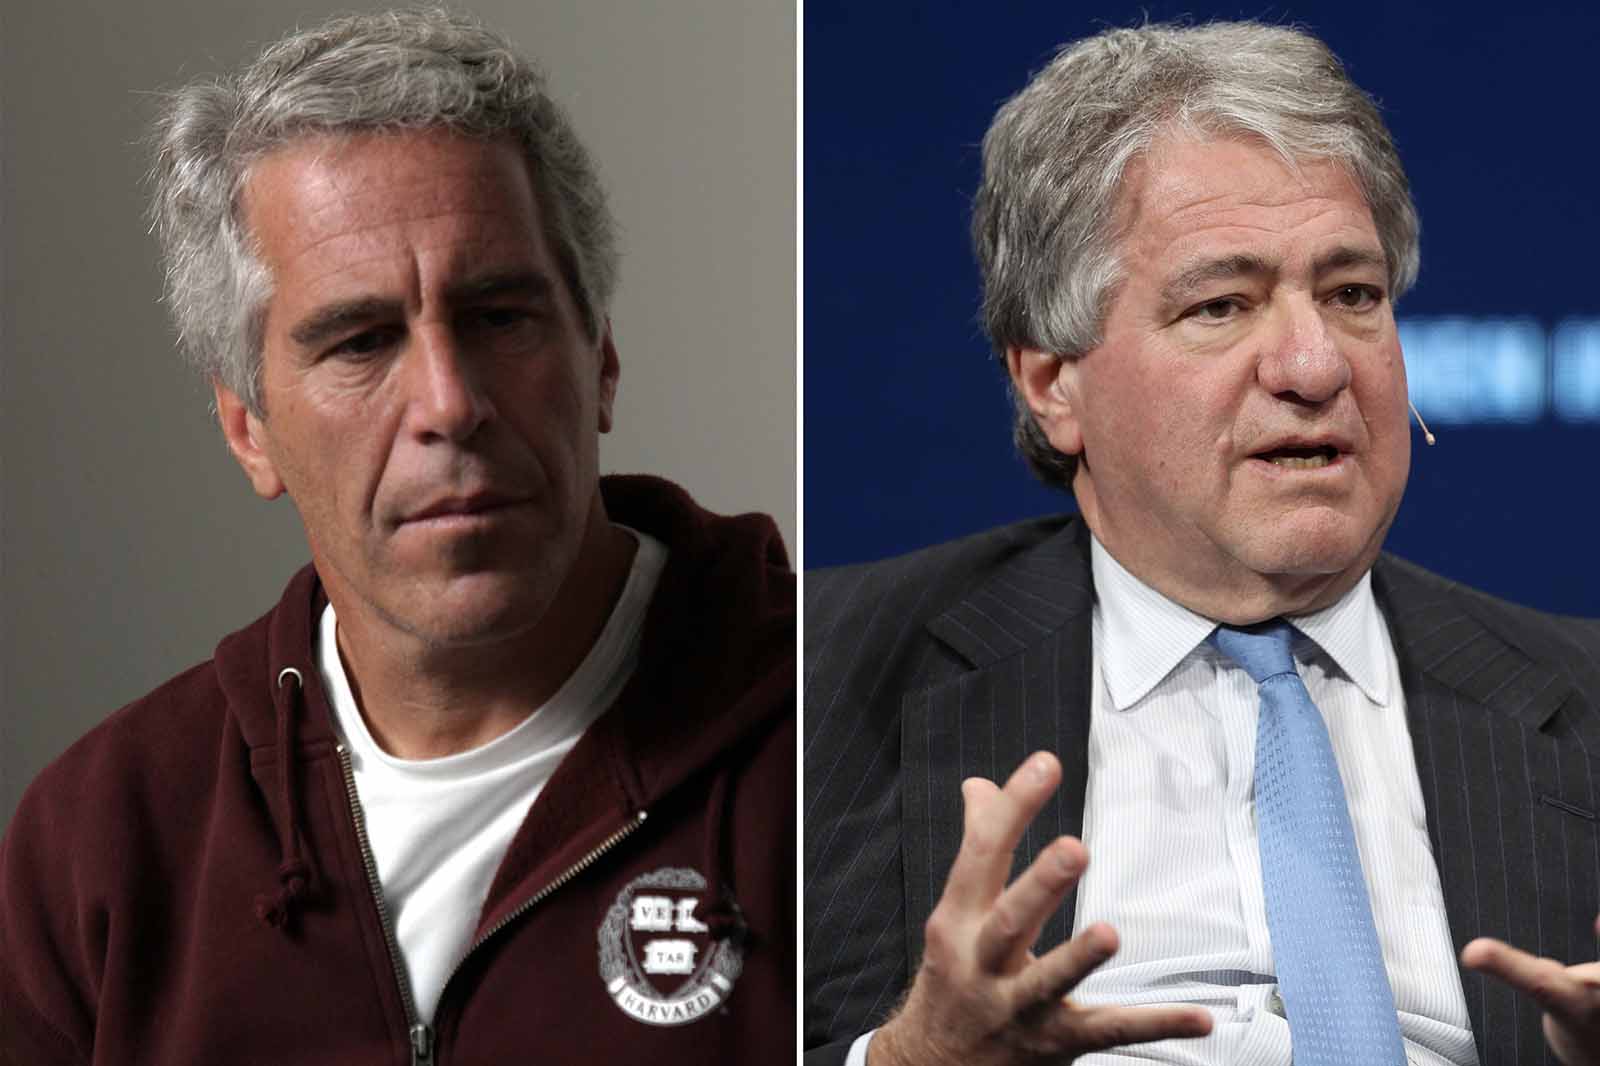 Leon Black is just one of numerous elite businessmen under the microscope for ties to Jeffrey Epstein. He's finally owning up to his connection.